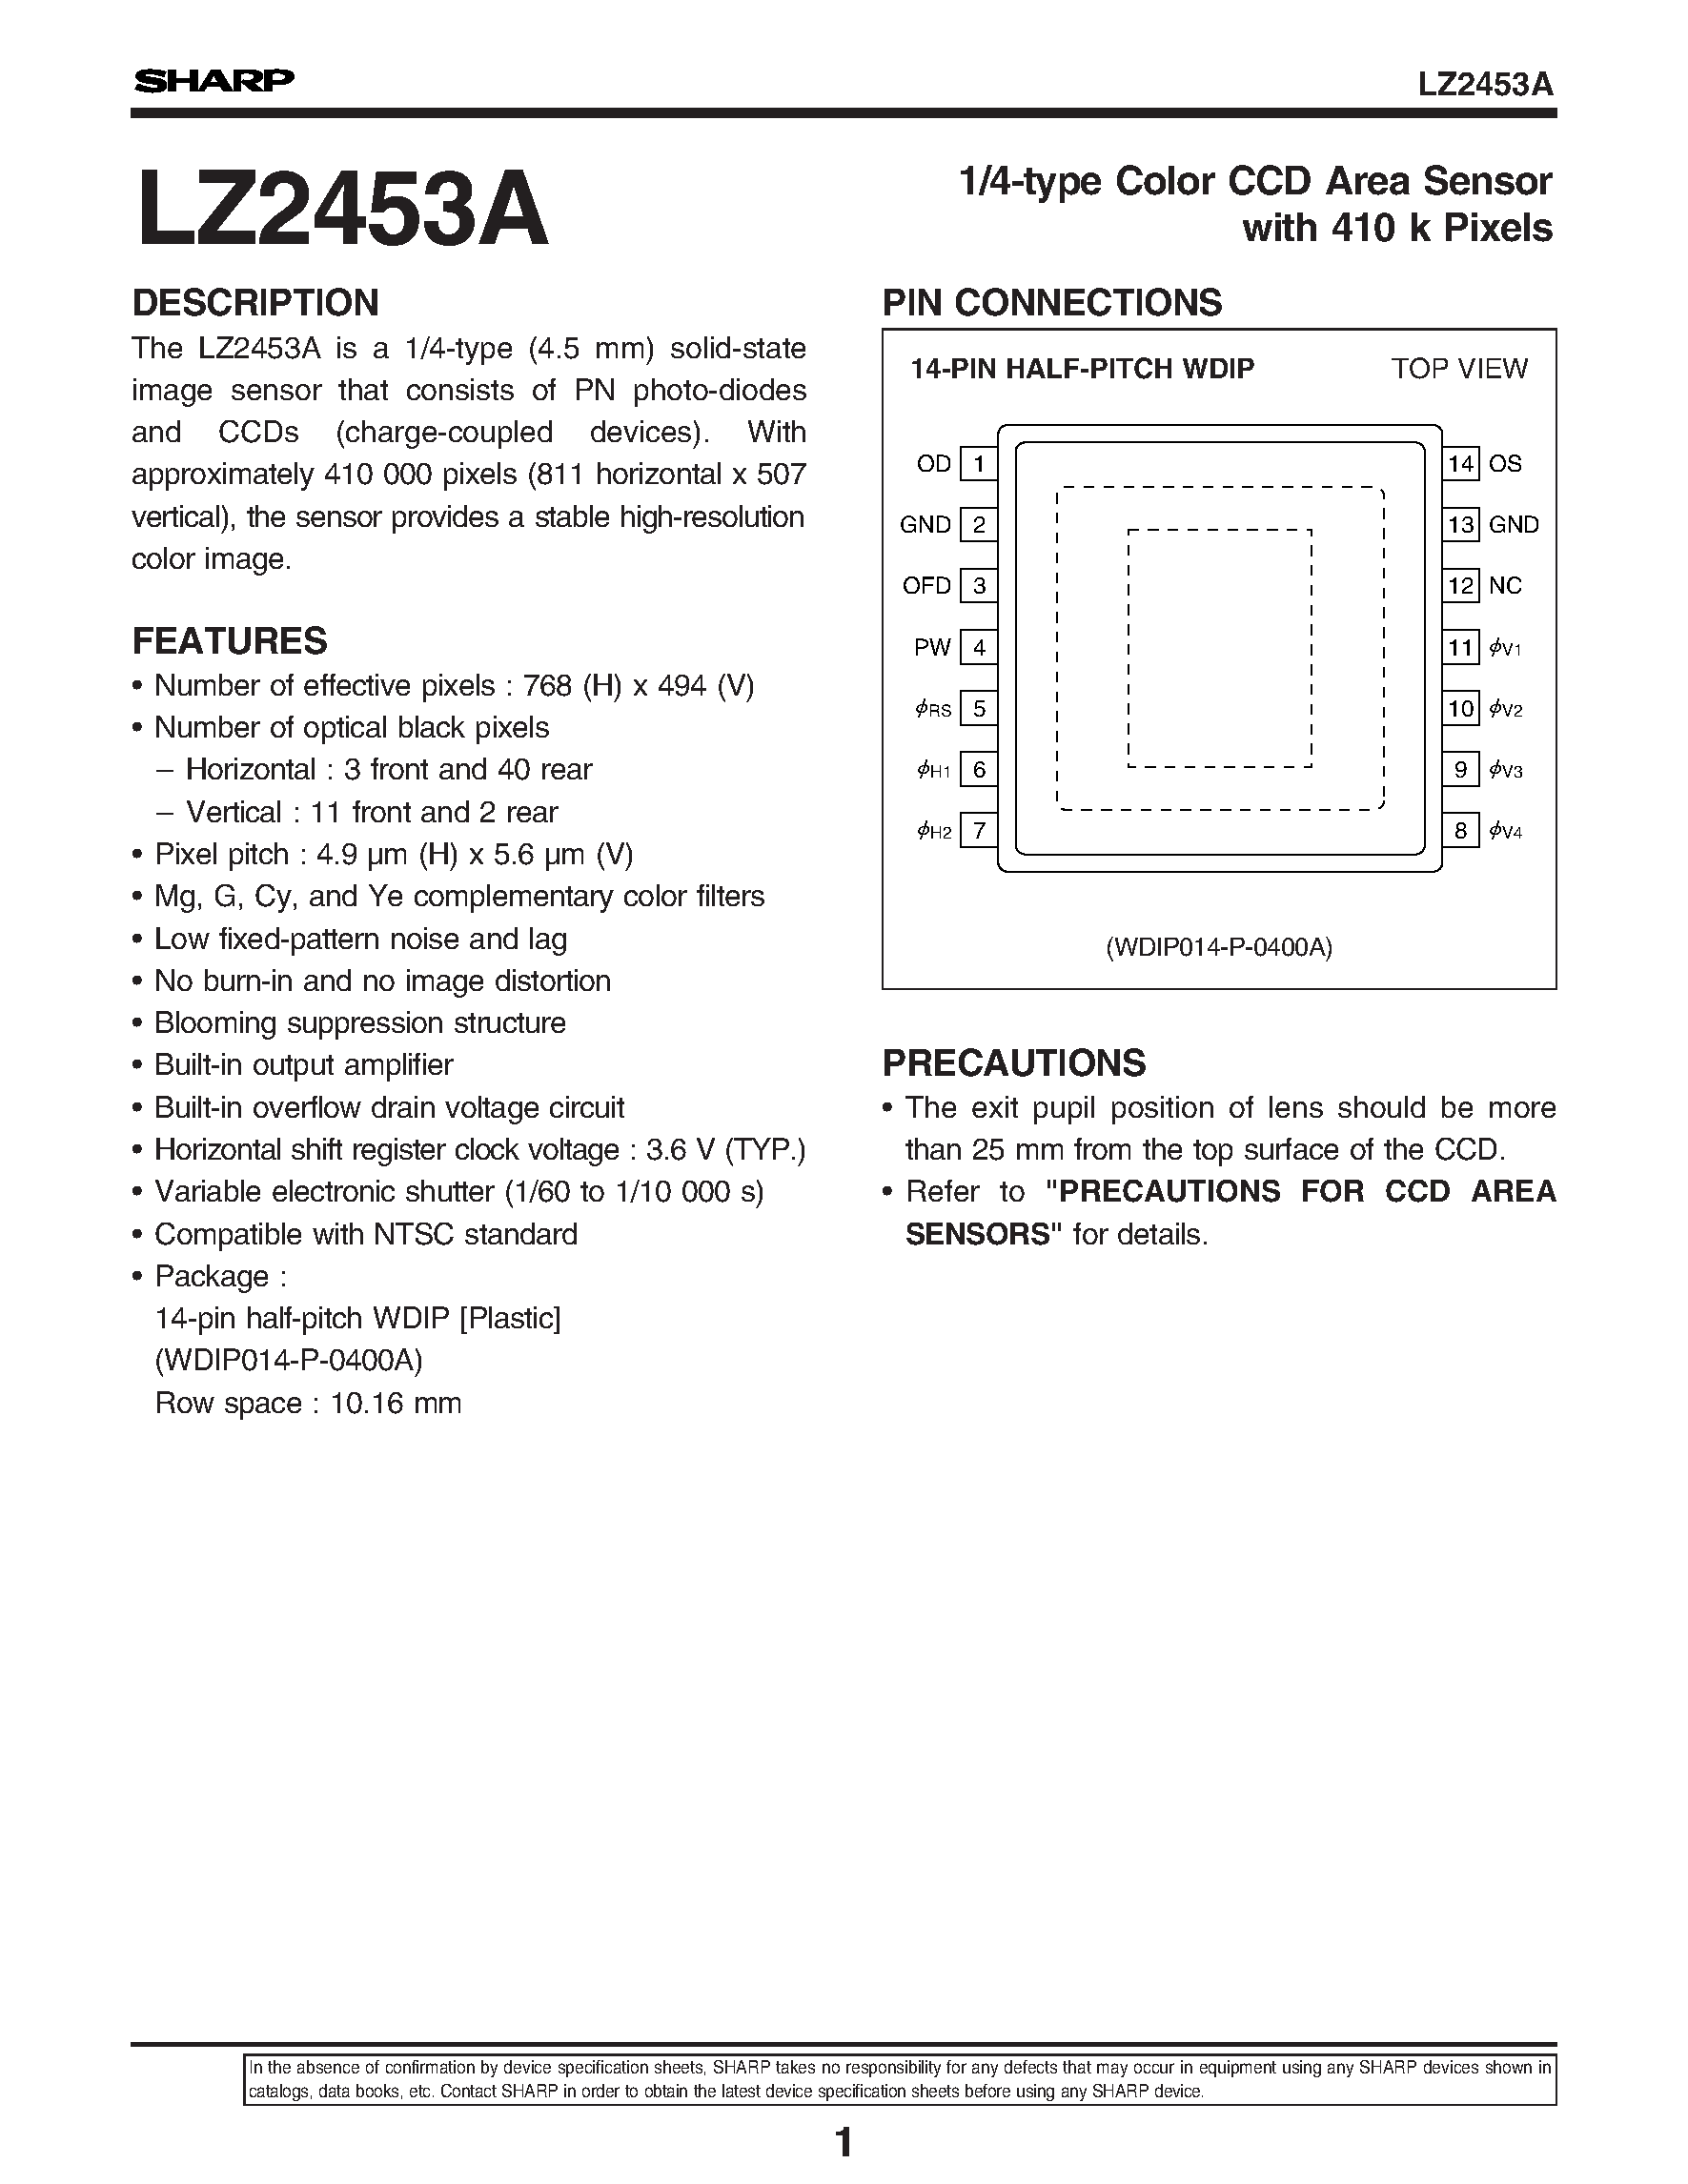 Datasheet LZ2453A - 1/4-type Color CCD Area Sensor with 410 k Pixels page 1